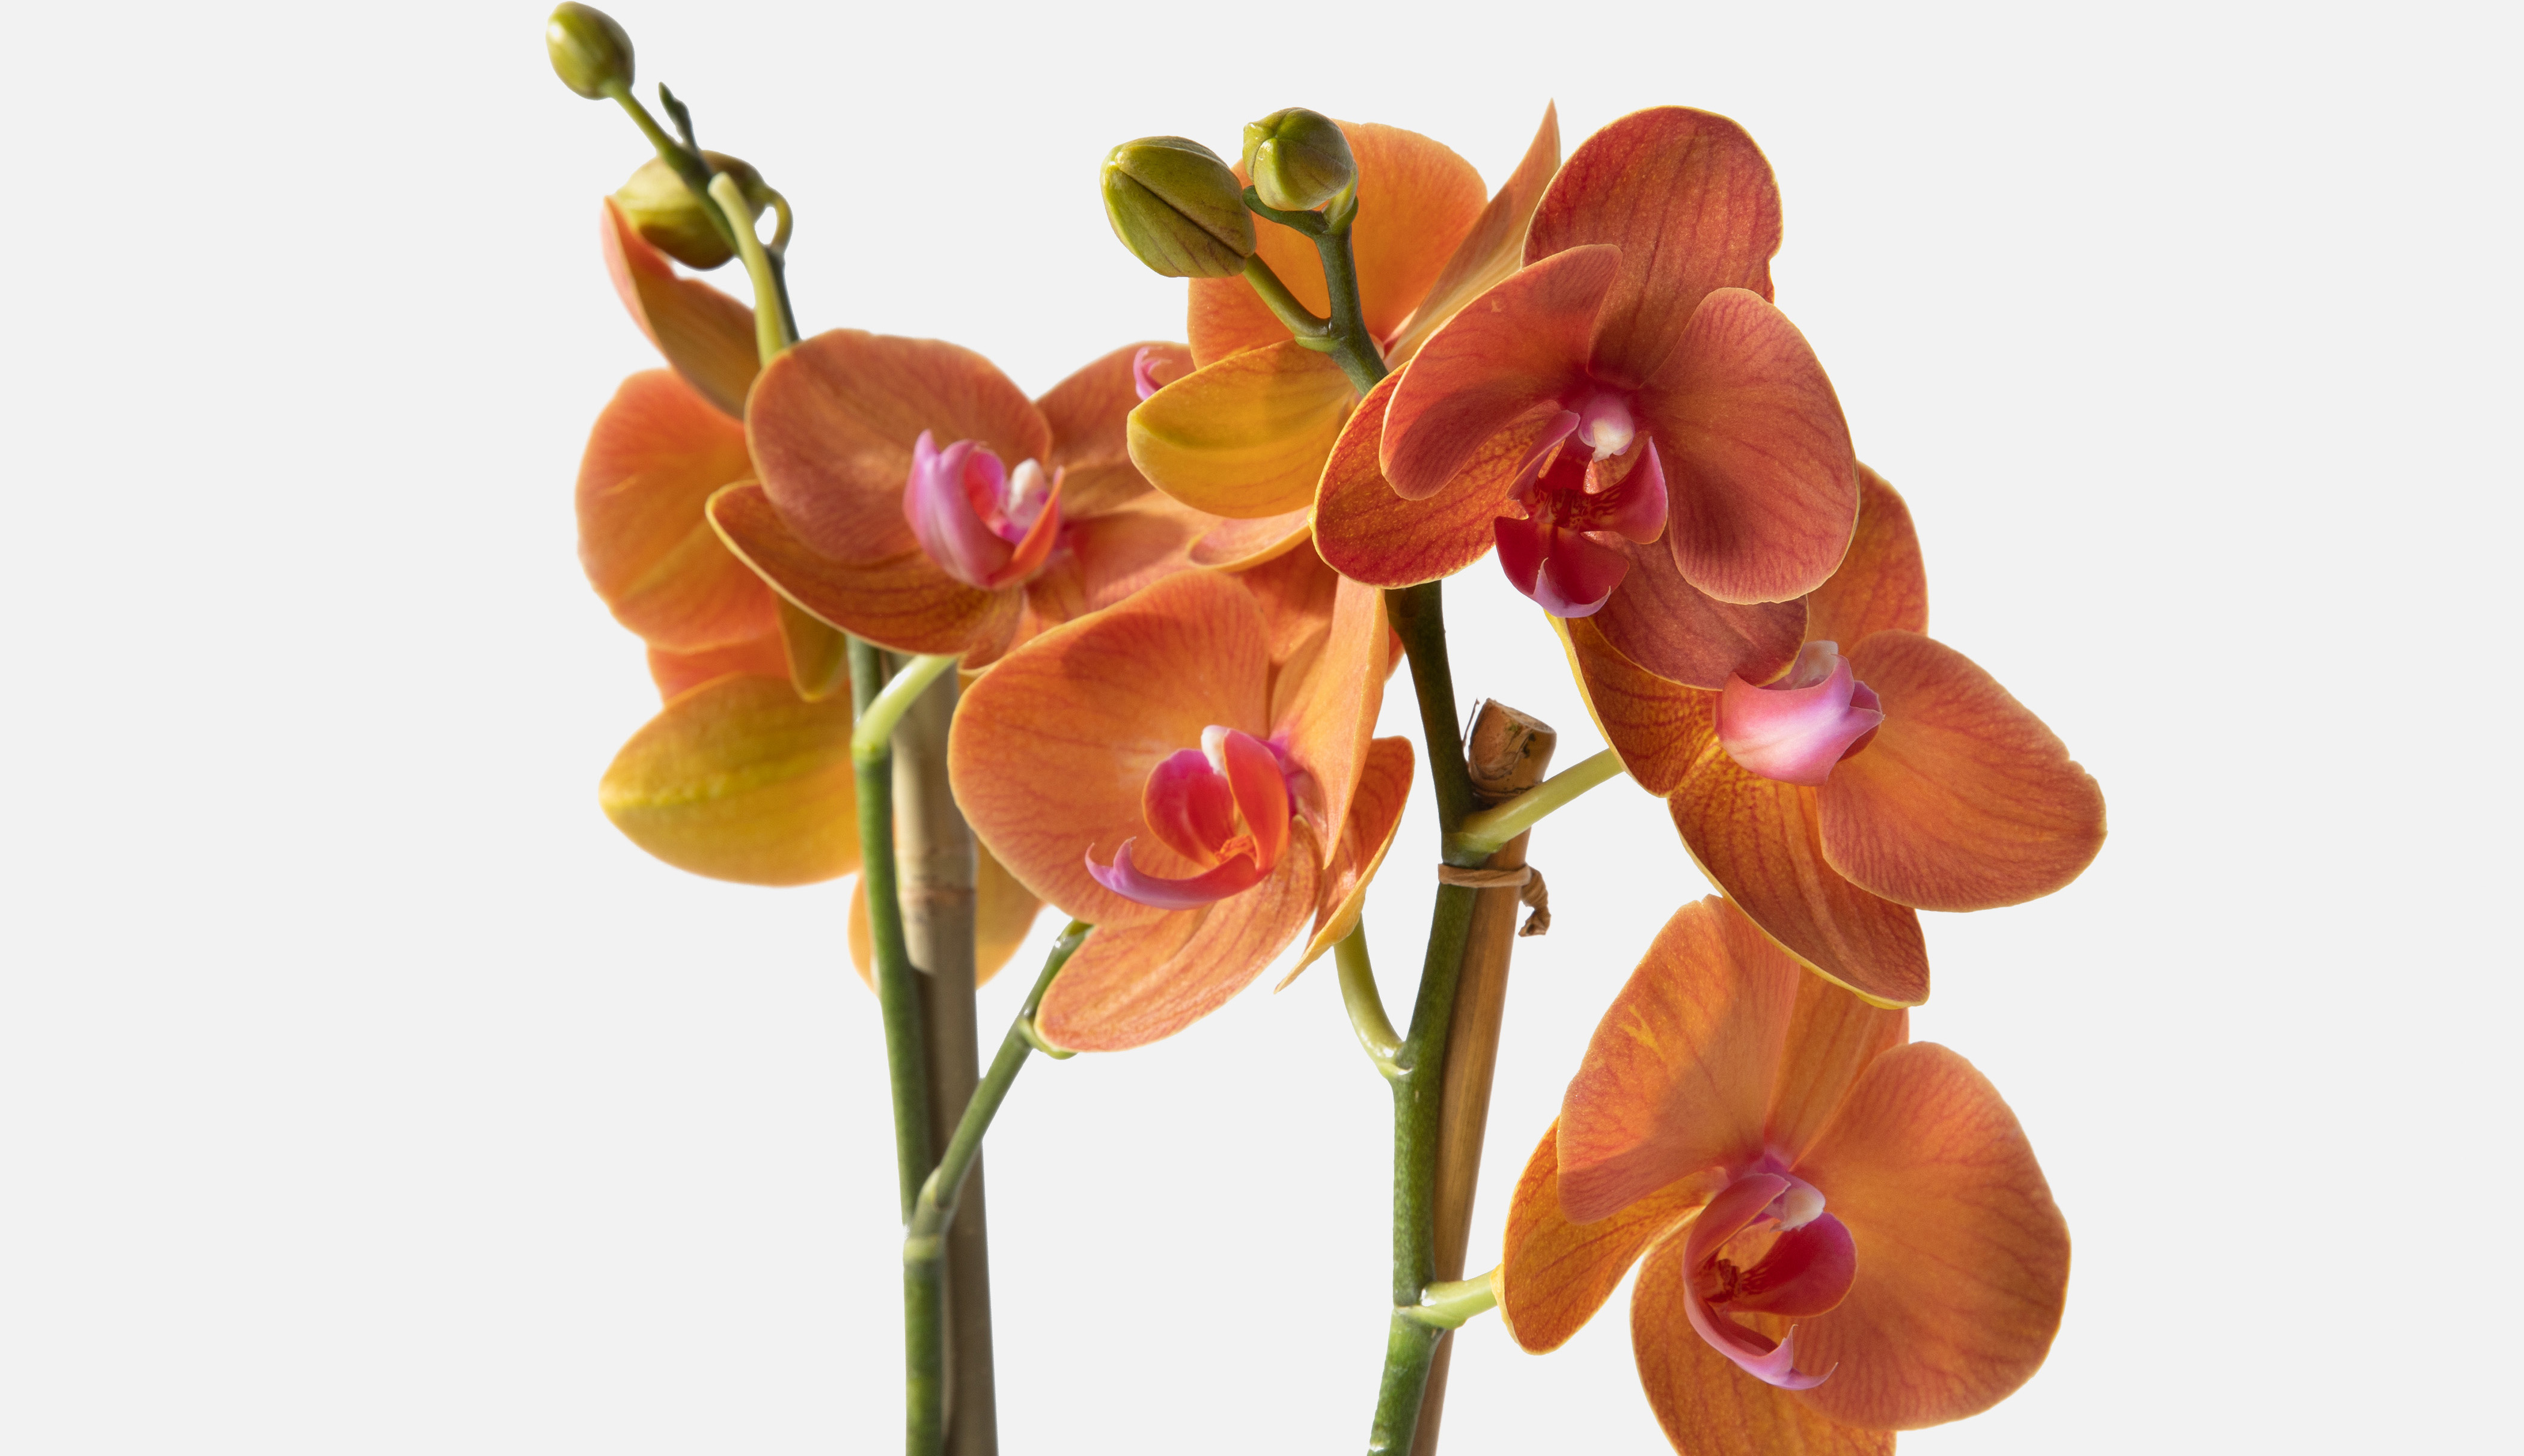 Close up image of an orange orchid